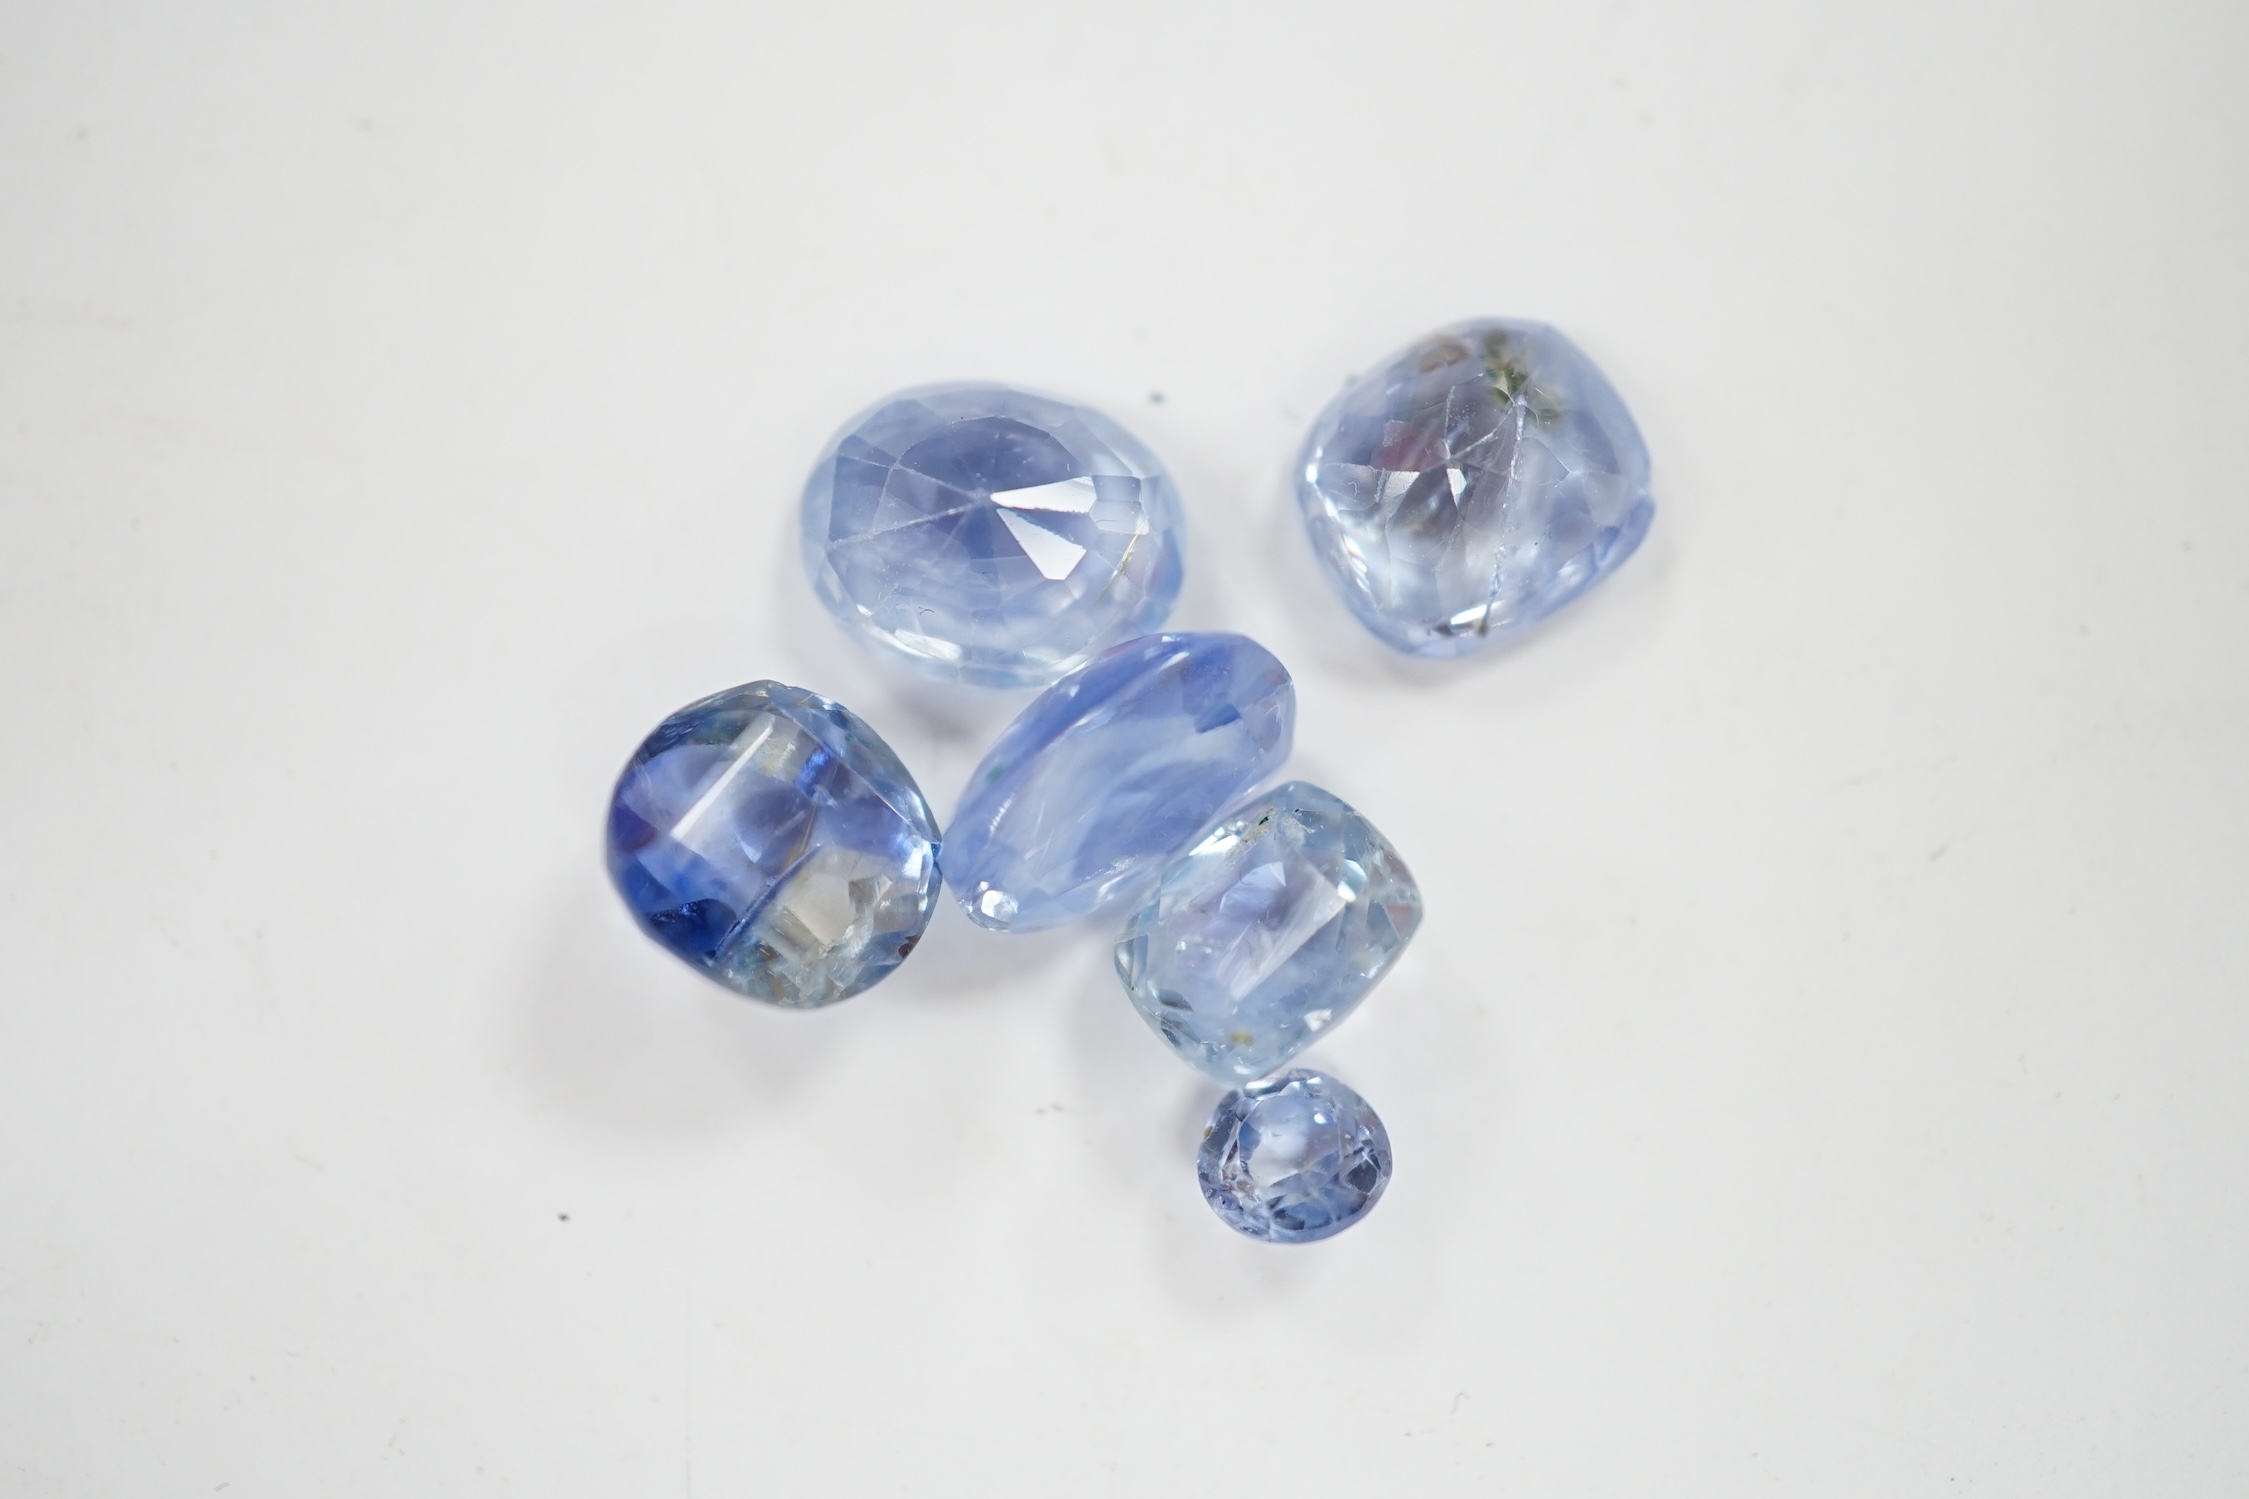 A group of ten cut unmounted pale blue sapphires, total carat weight approximately 15.1ct. Condition - fair